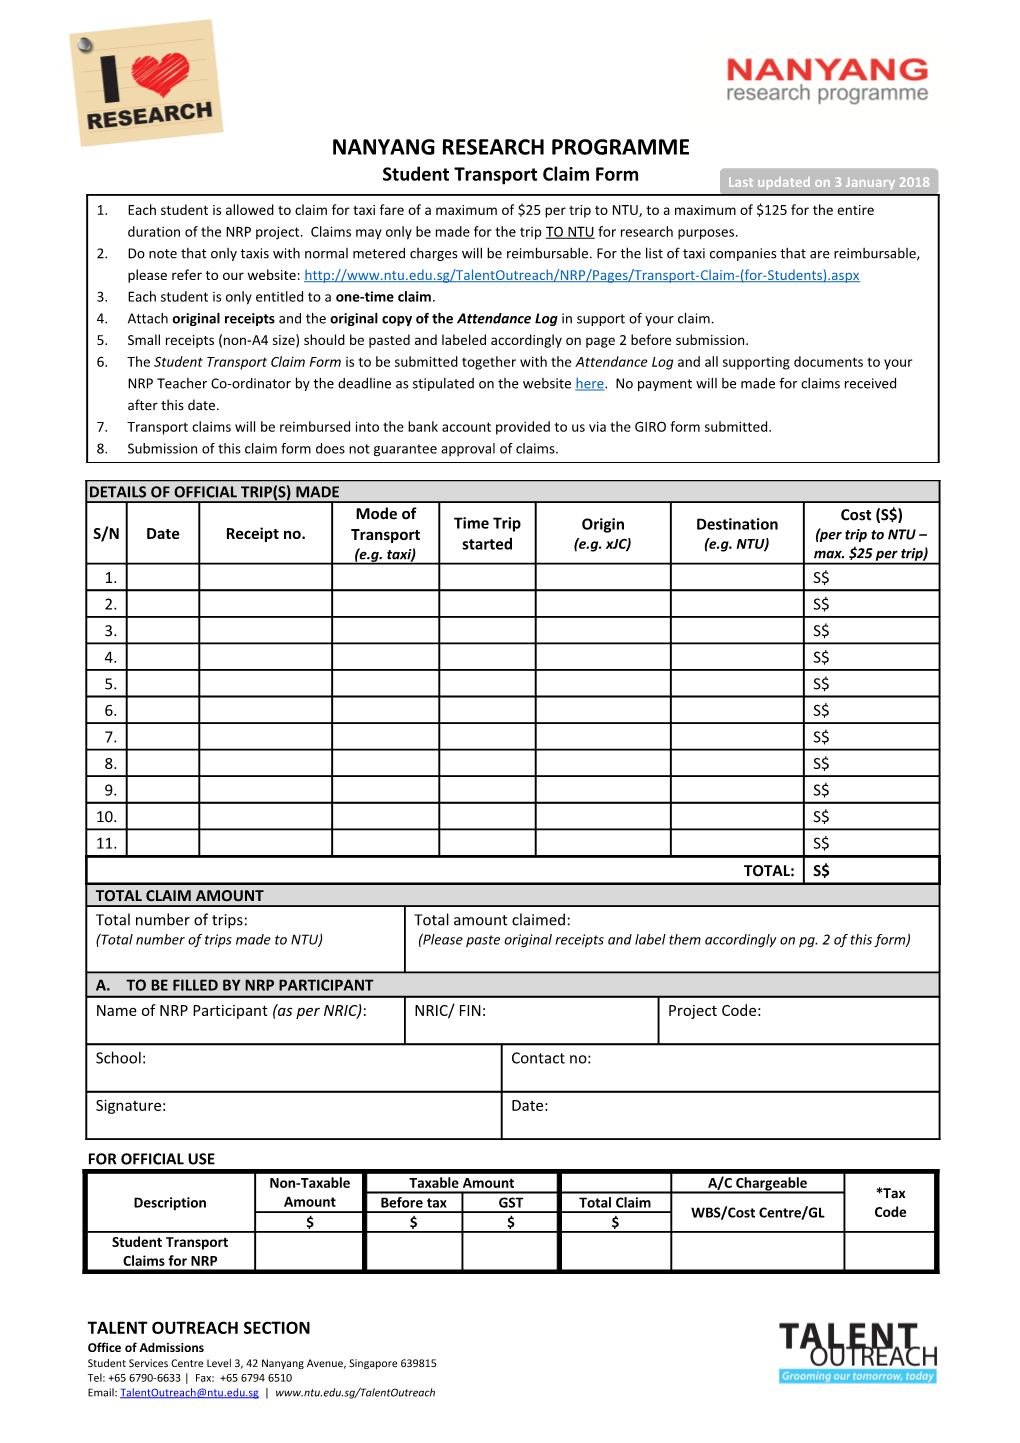 Student Transport Claims Form (Amended)